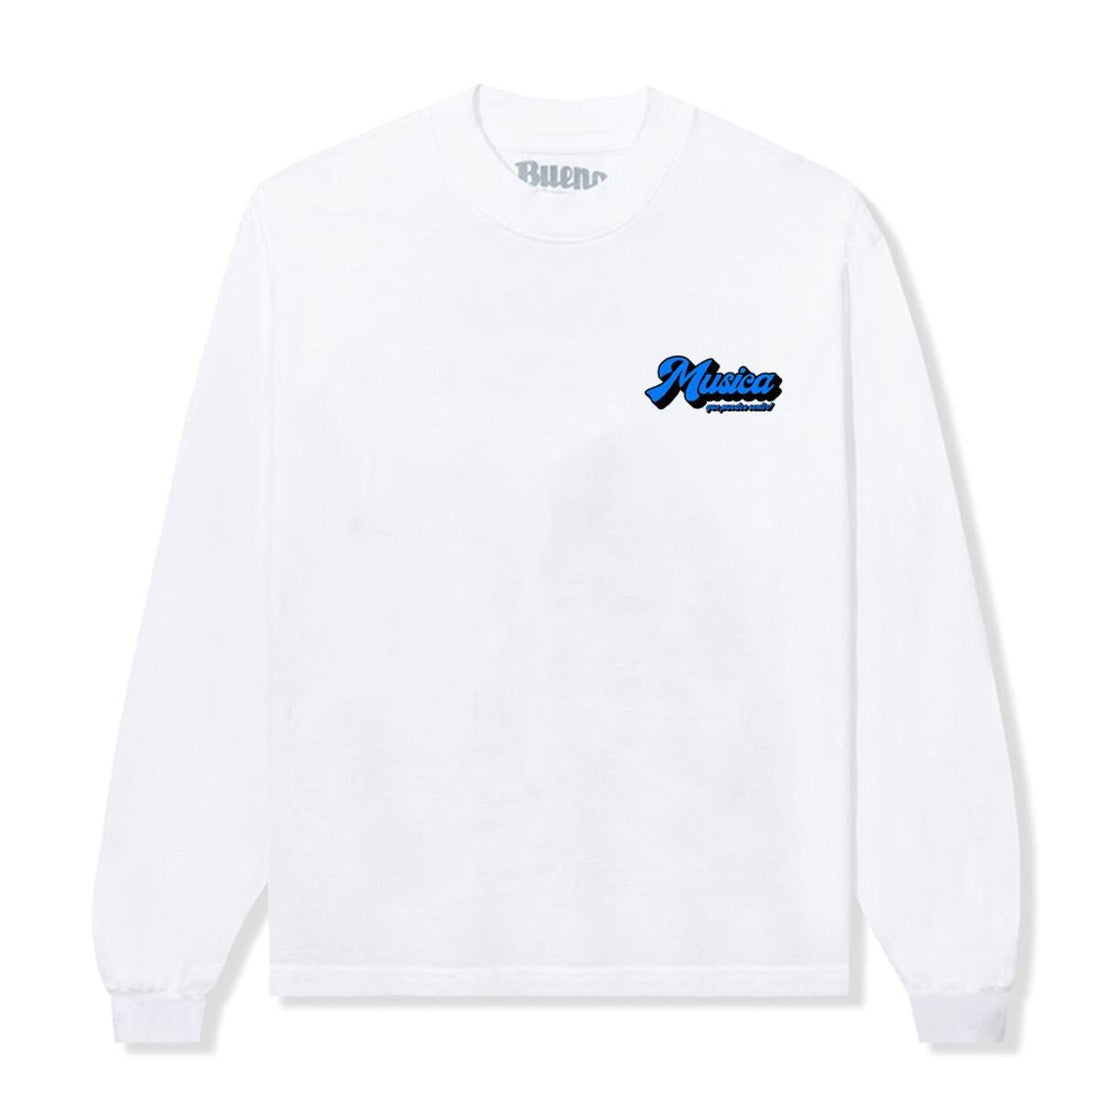 BUENO - MUSIC YOU CAN FEEL L/S TEE - WHITE